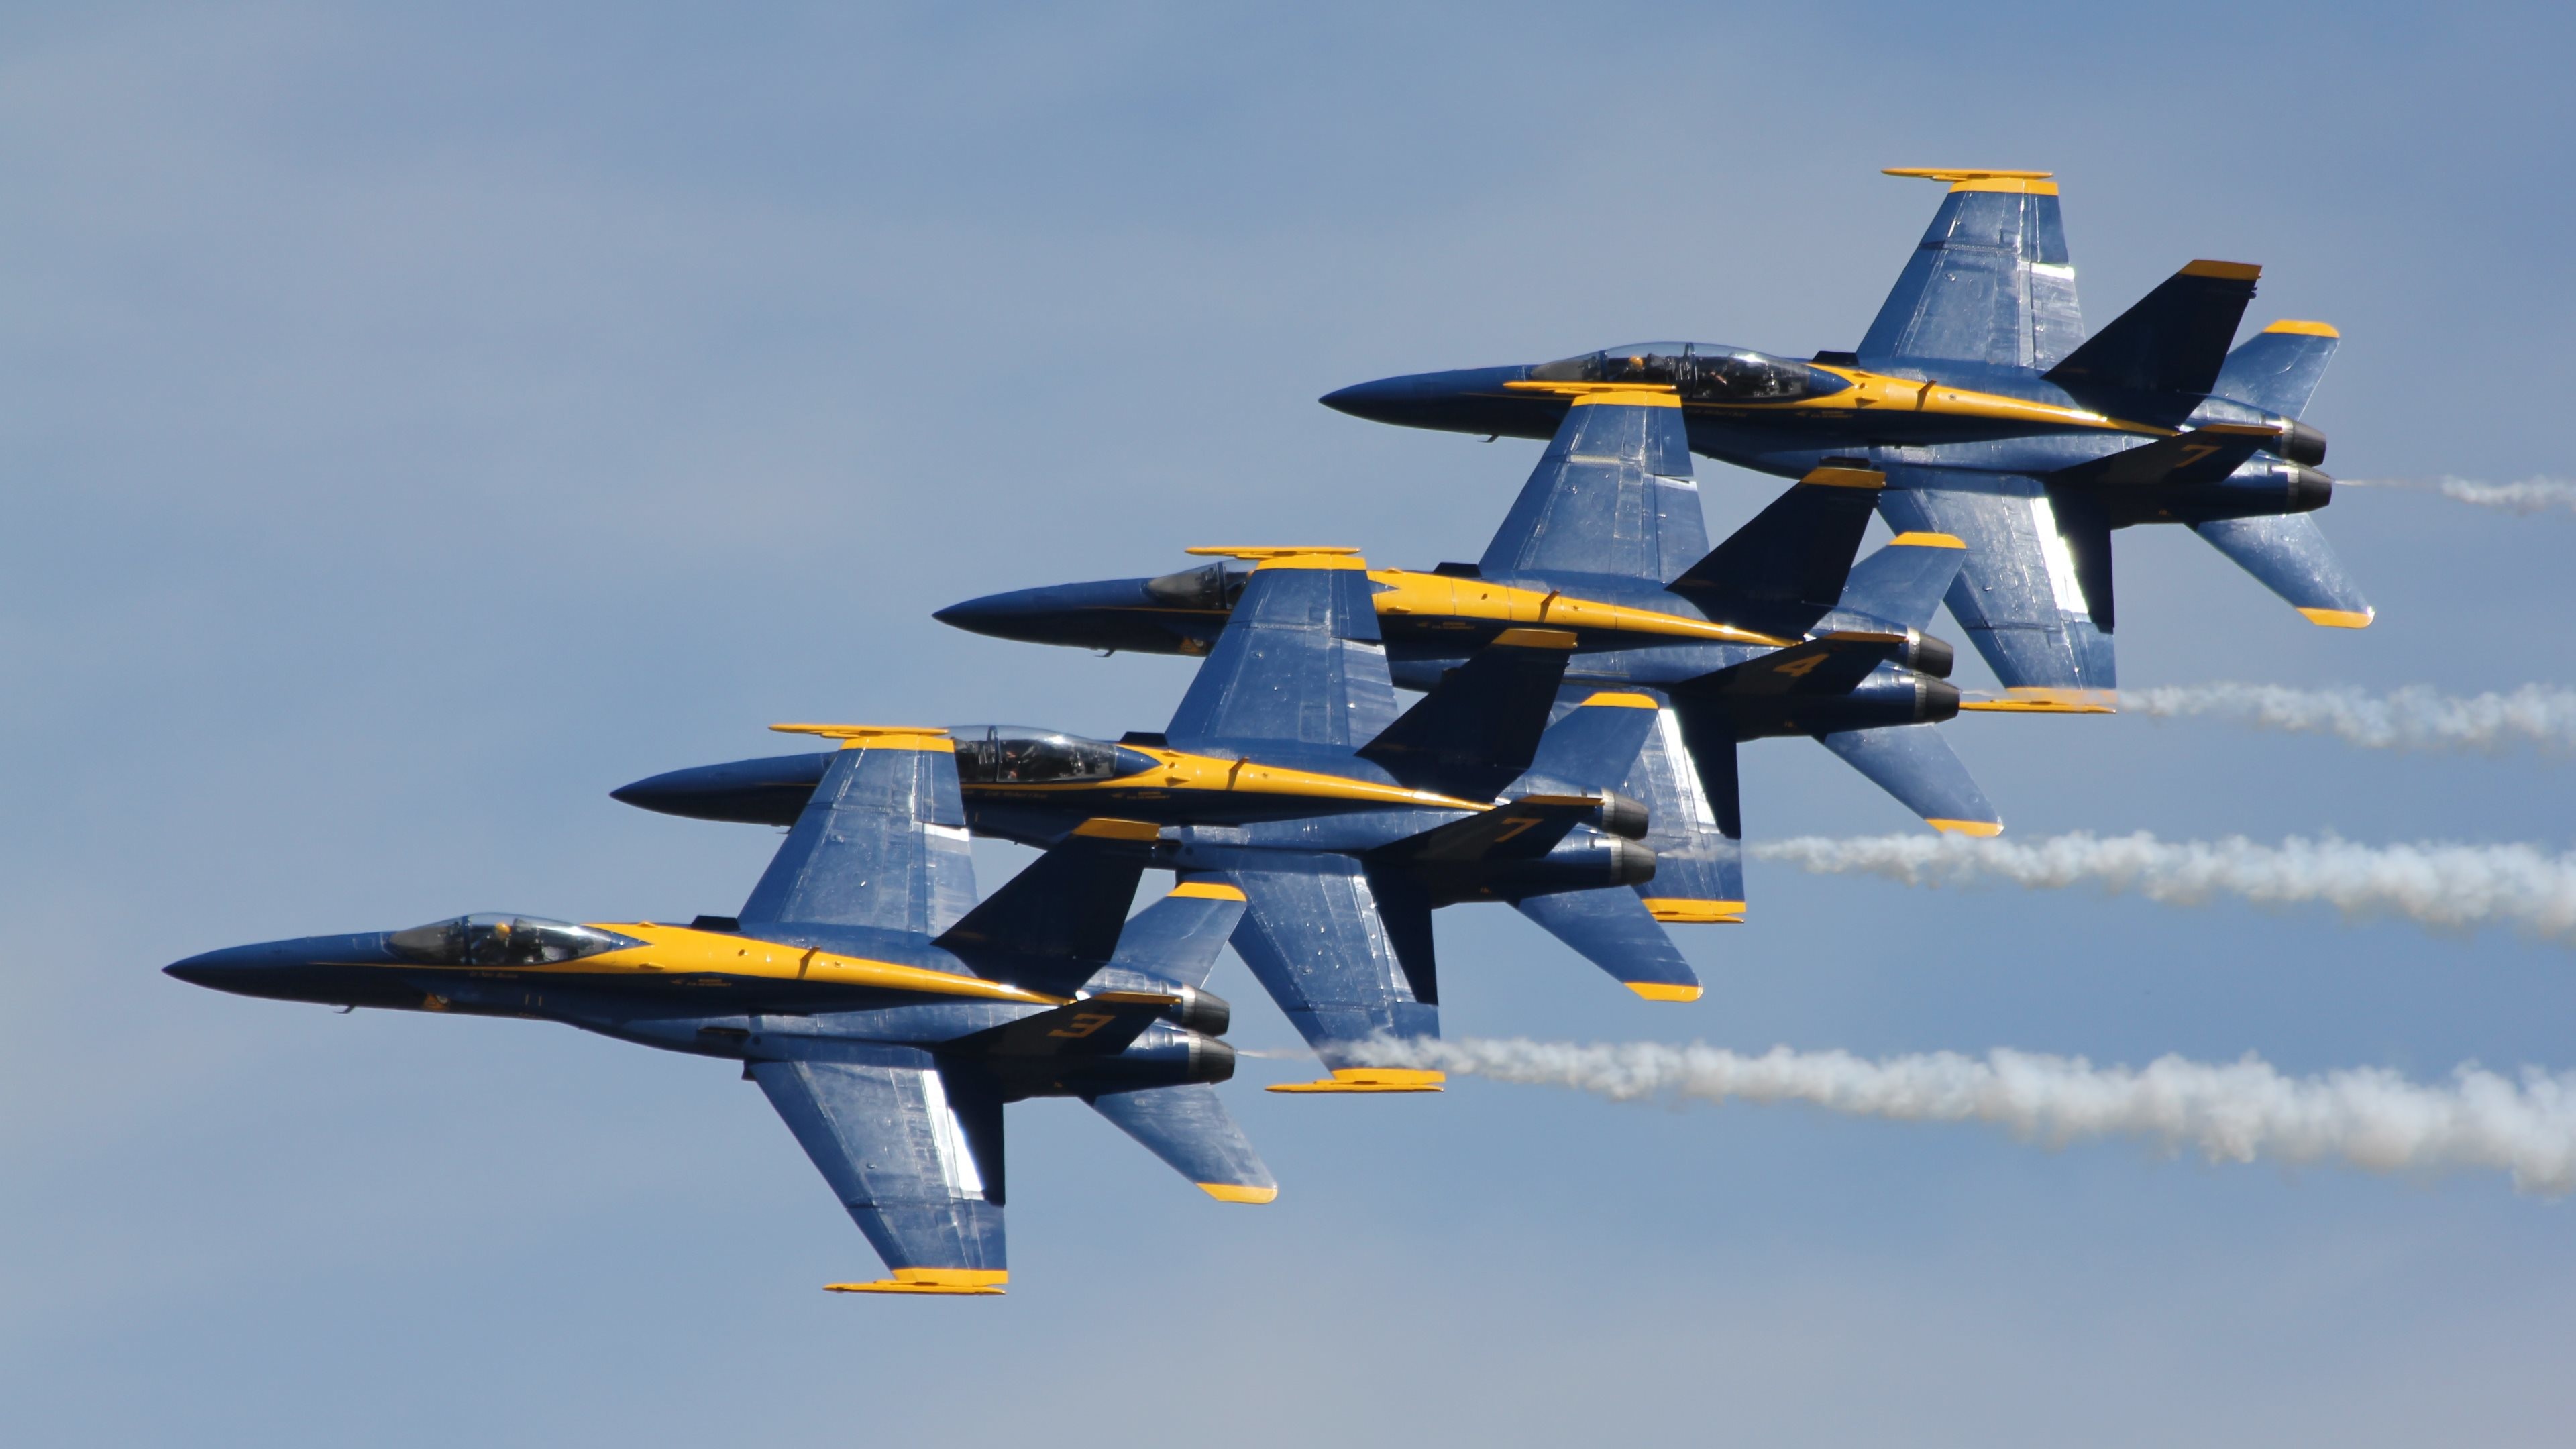 3840x2160 4K HD Wallpaper: Air Show with Blue Angels F-18 Squadron